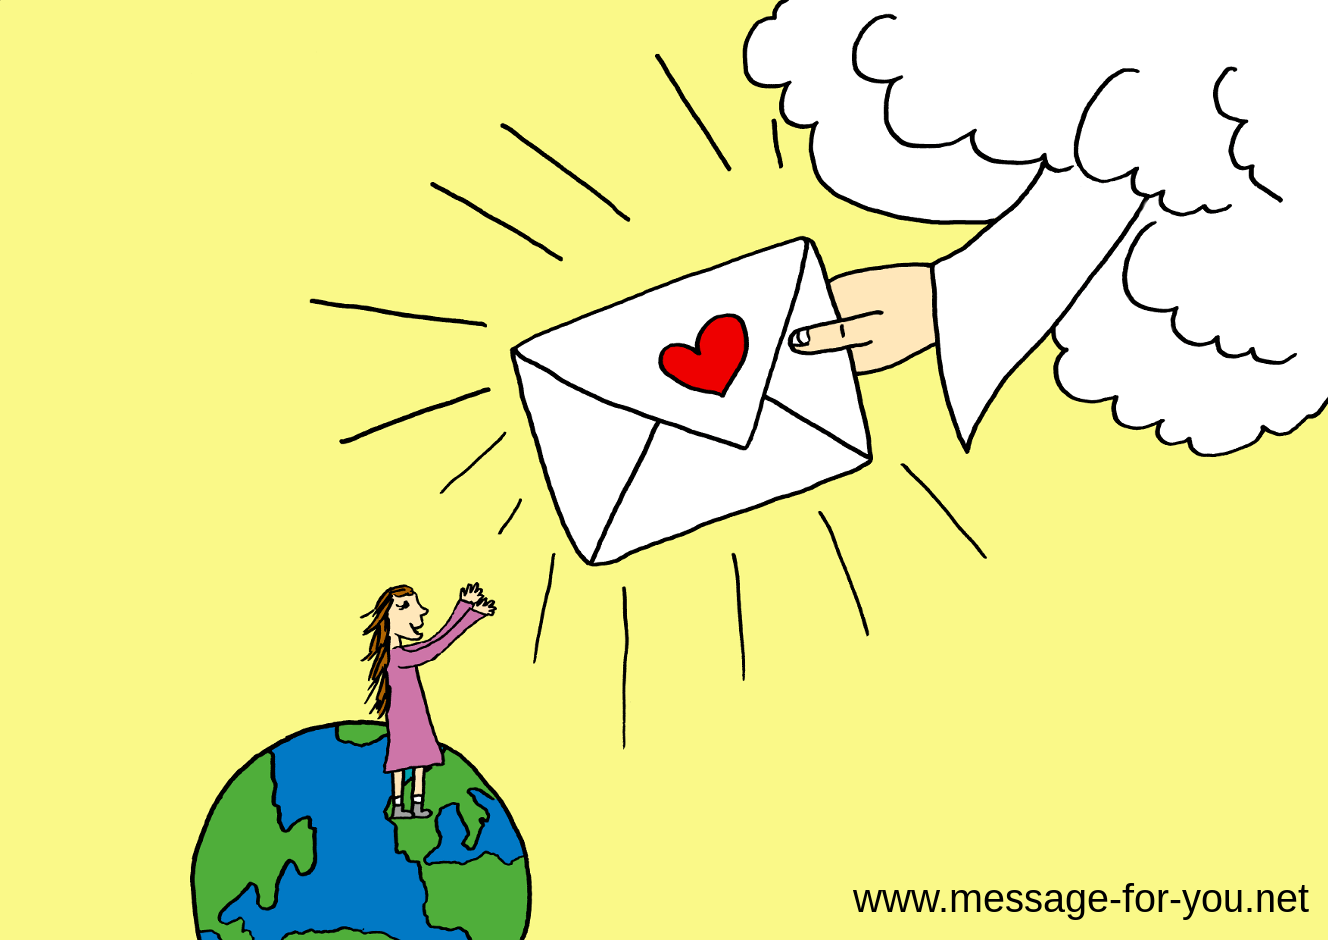 Coulored drawing of Child on Earth receiving letter from god from heaven